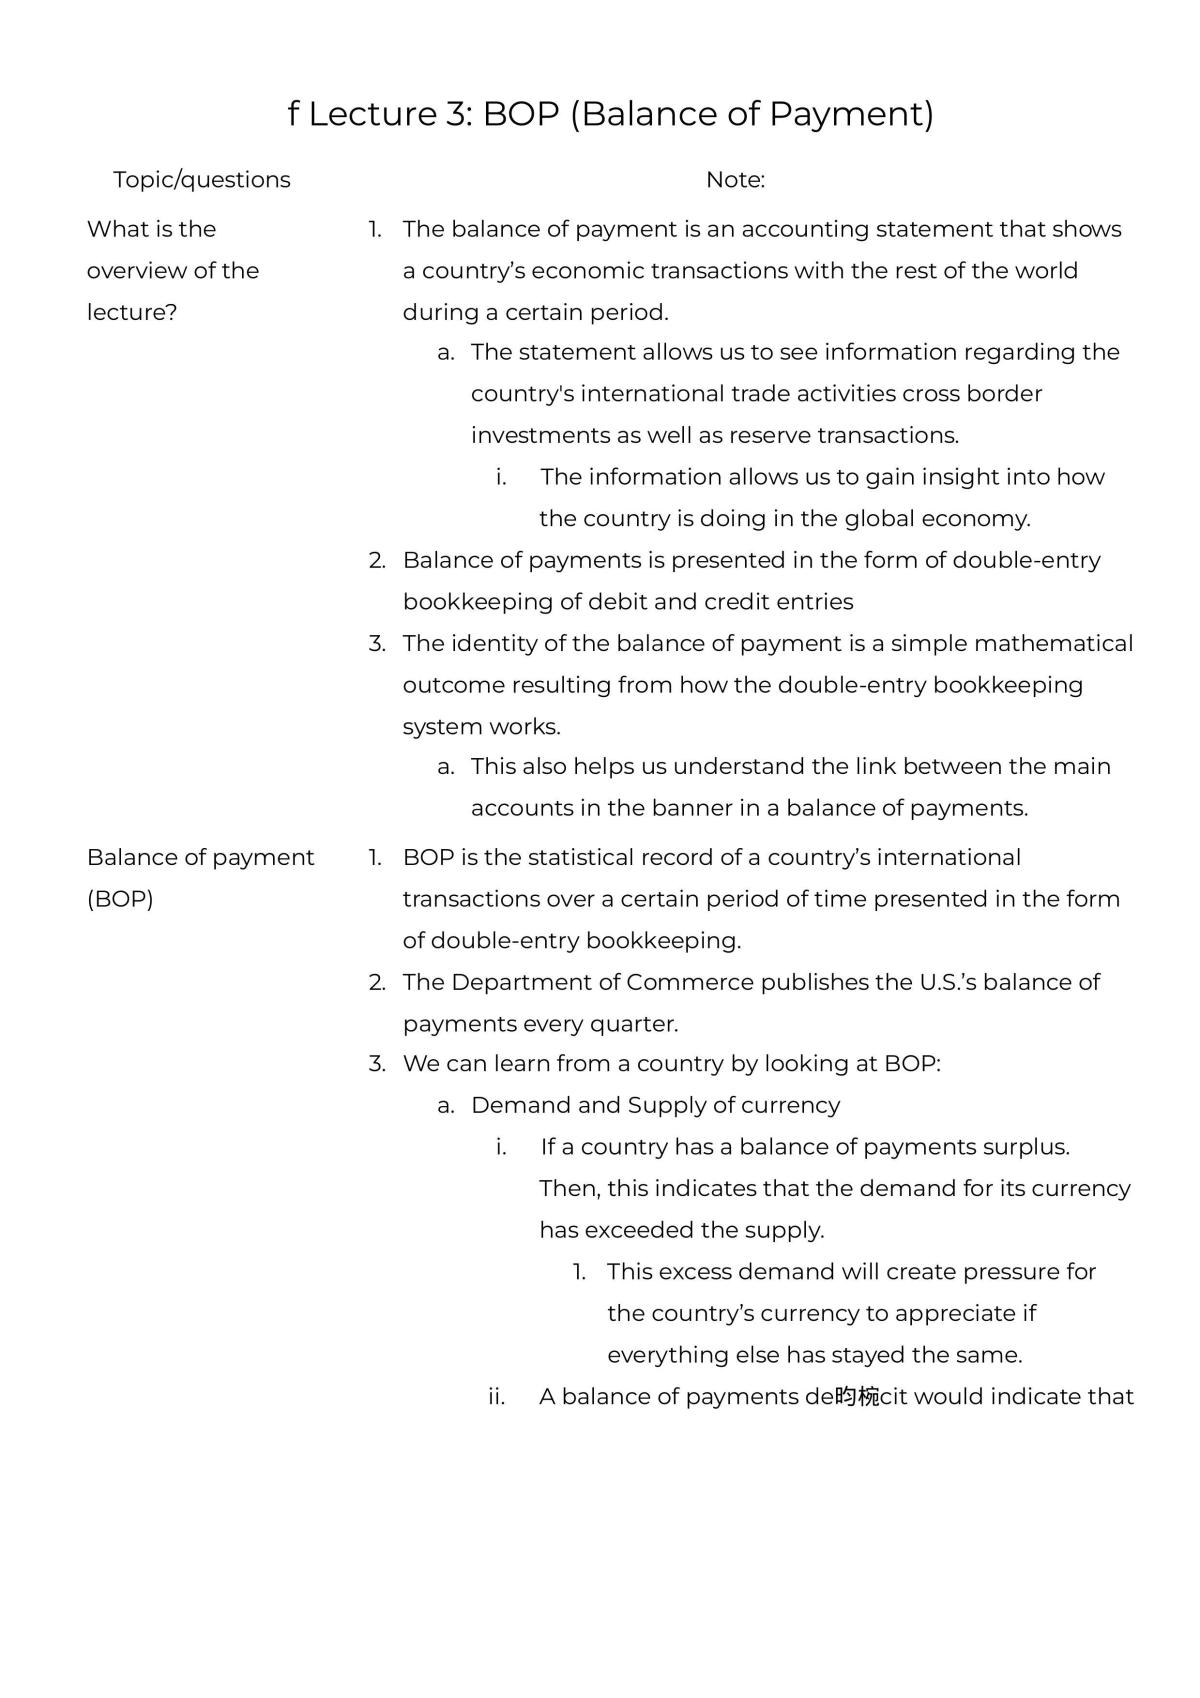 Lecture 3: BOP (Balance of Payment) - Page 1